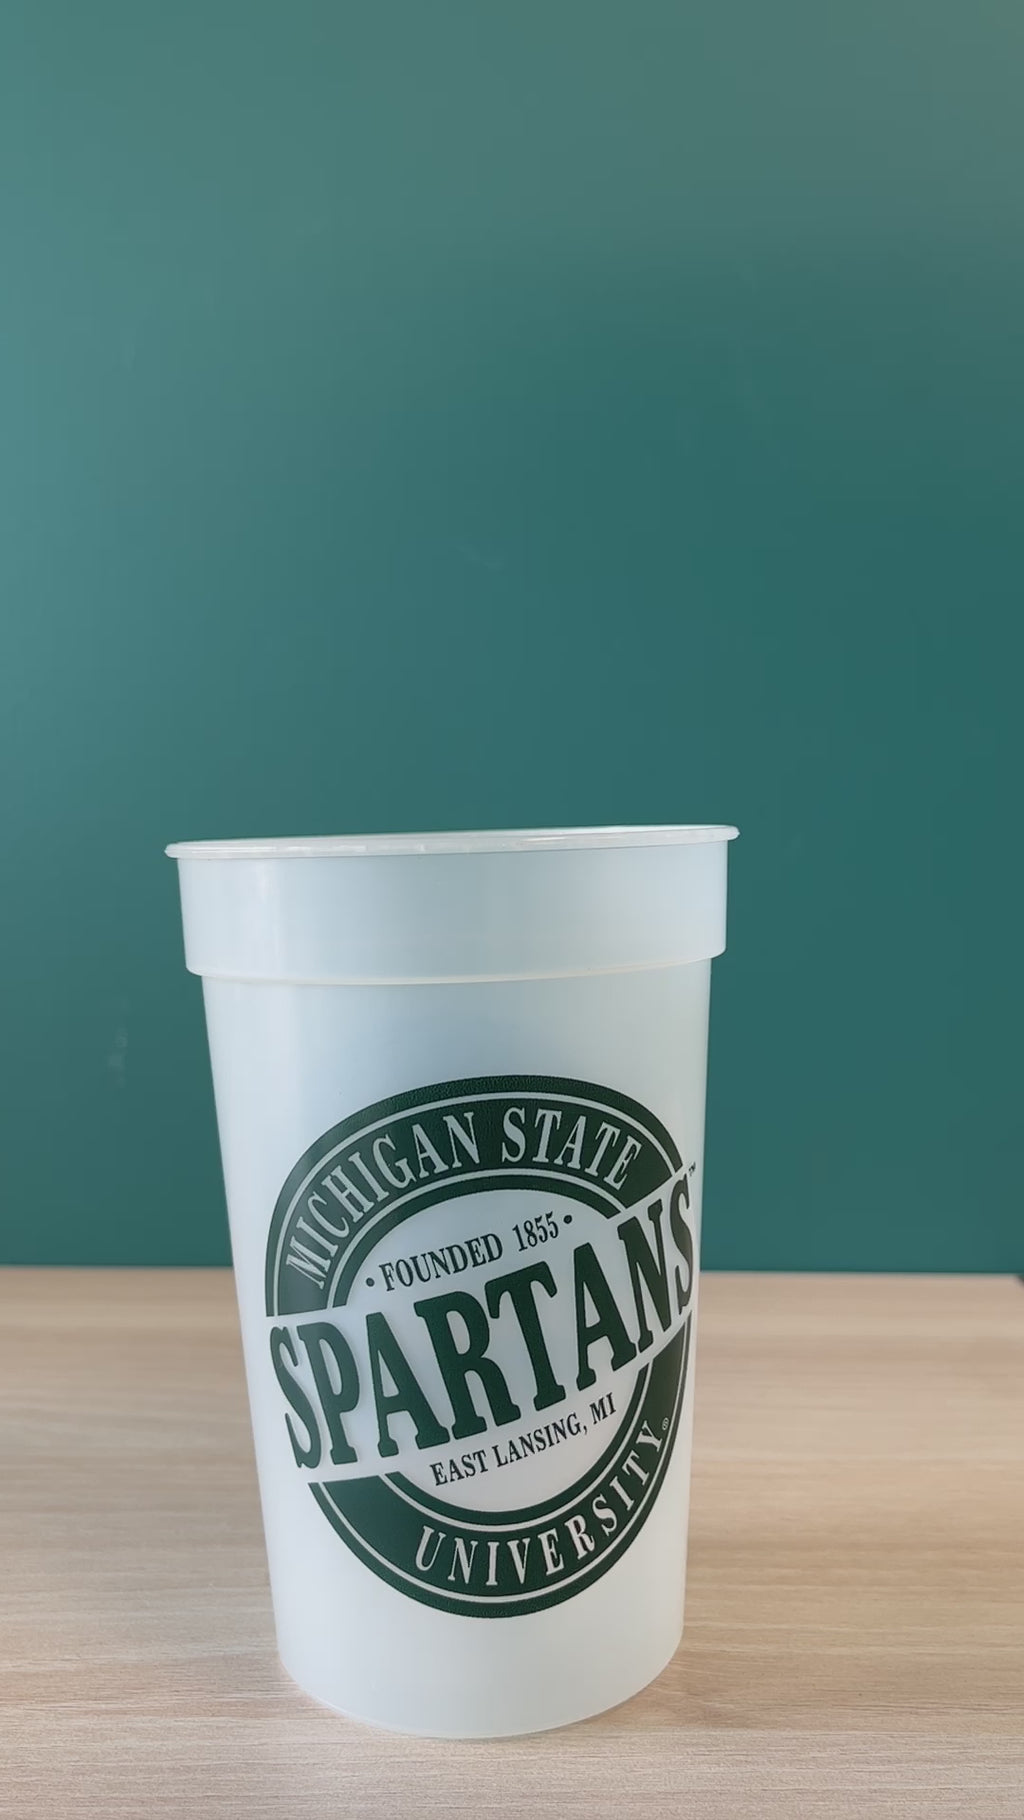 Water pouring into a Michigan State Mood cup, which changes colors when cold liquids are added.